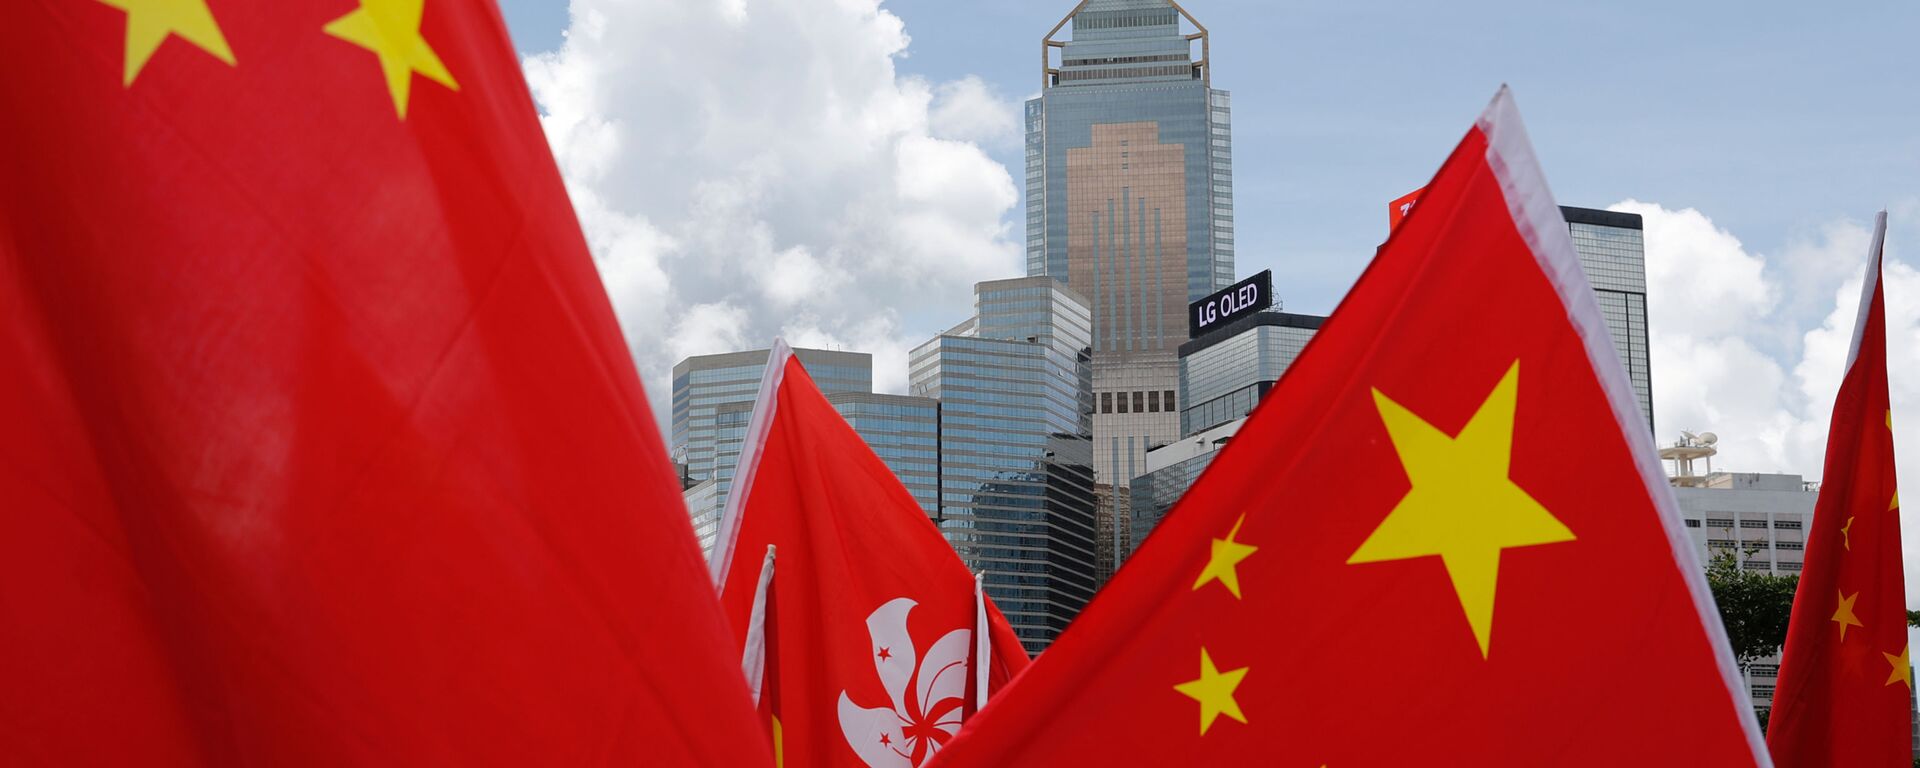 Buildings are seen above Hong Kong and Chinese flags, as pro-China supporters celebration after China's parliament passes national security law for Hong Kong, in Hong Kong, China June 30, 2020.  - Sputnik International, 1920, 03.07.2020